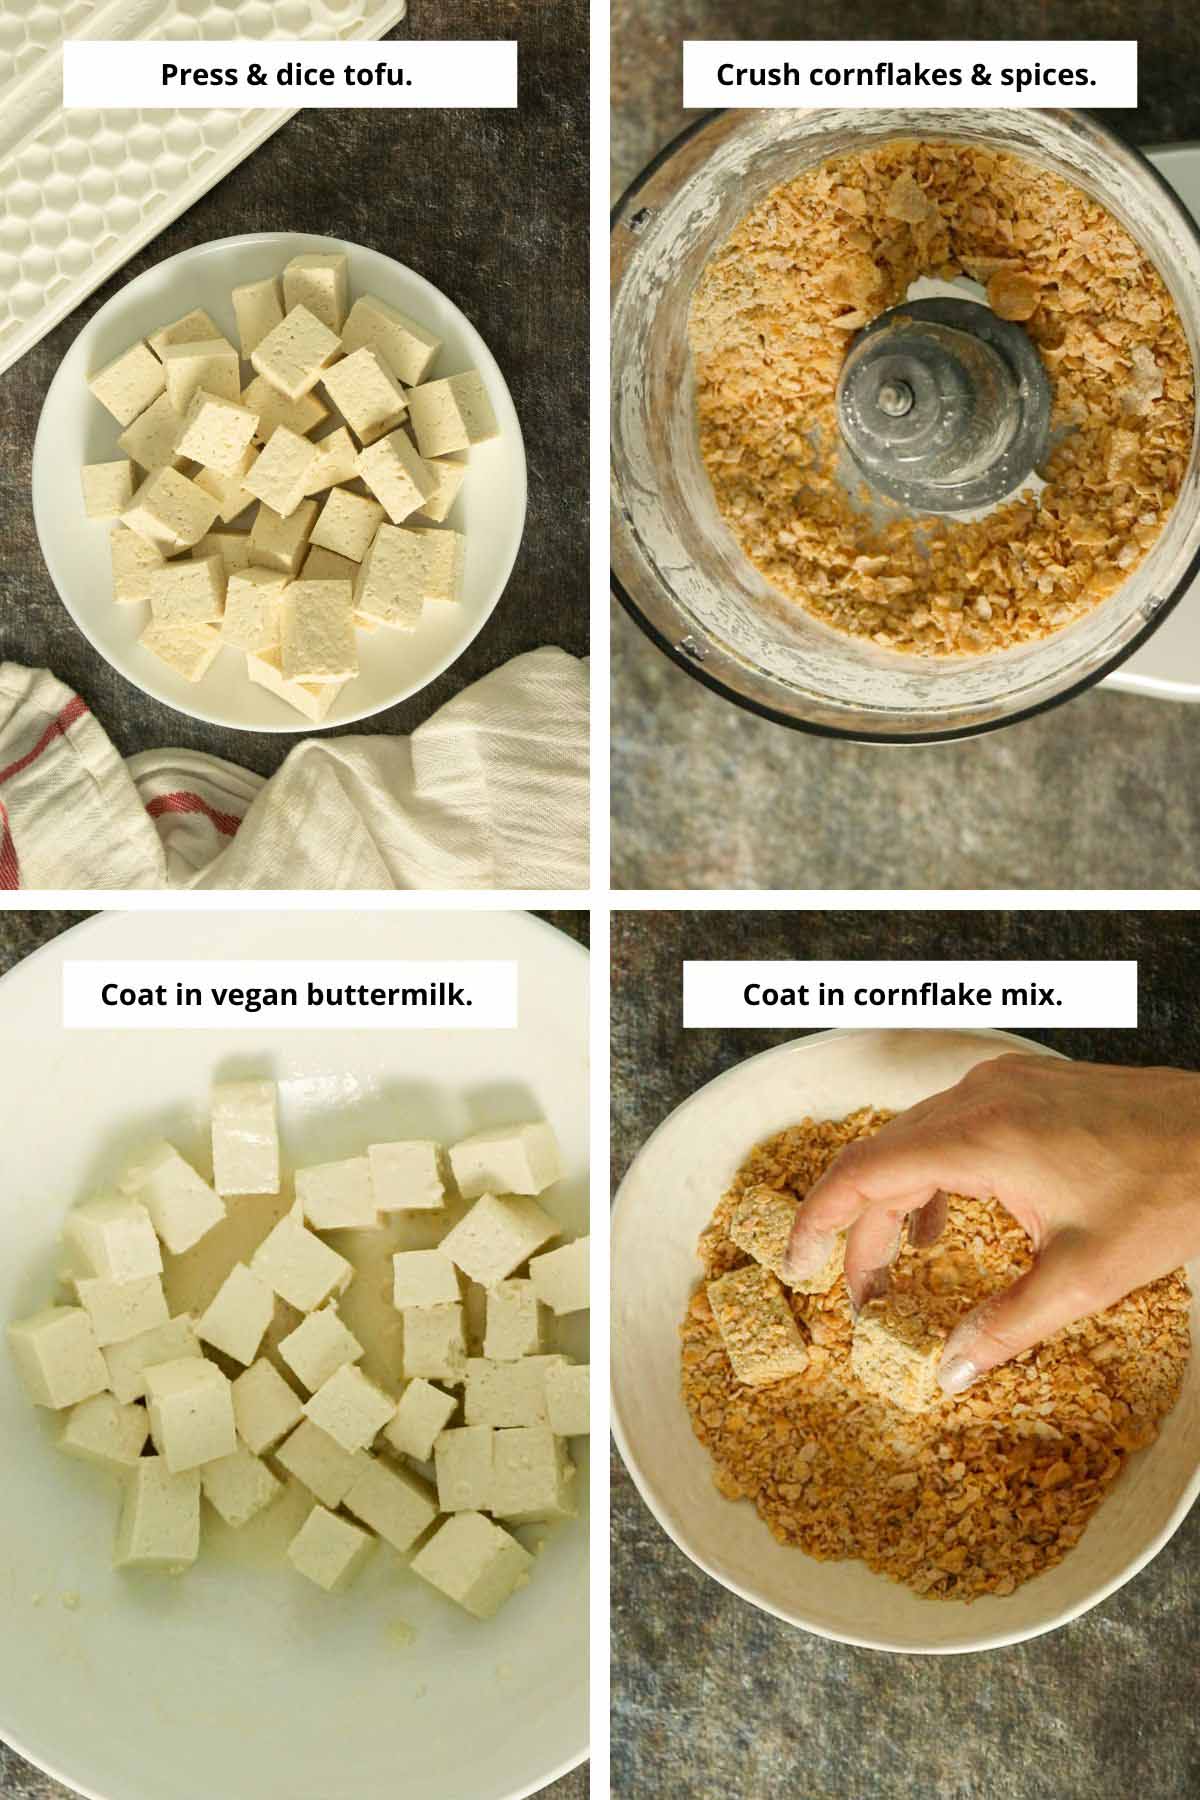 image collage showing the tofu pieces, the cornflake mixture, the tofu in the vegan buttermilk and a close-up of a piece of tofu after coating that's ready to cook